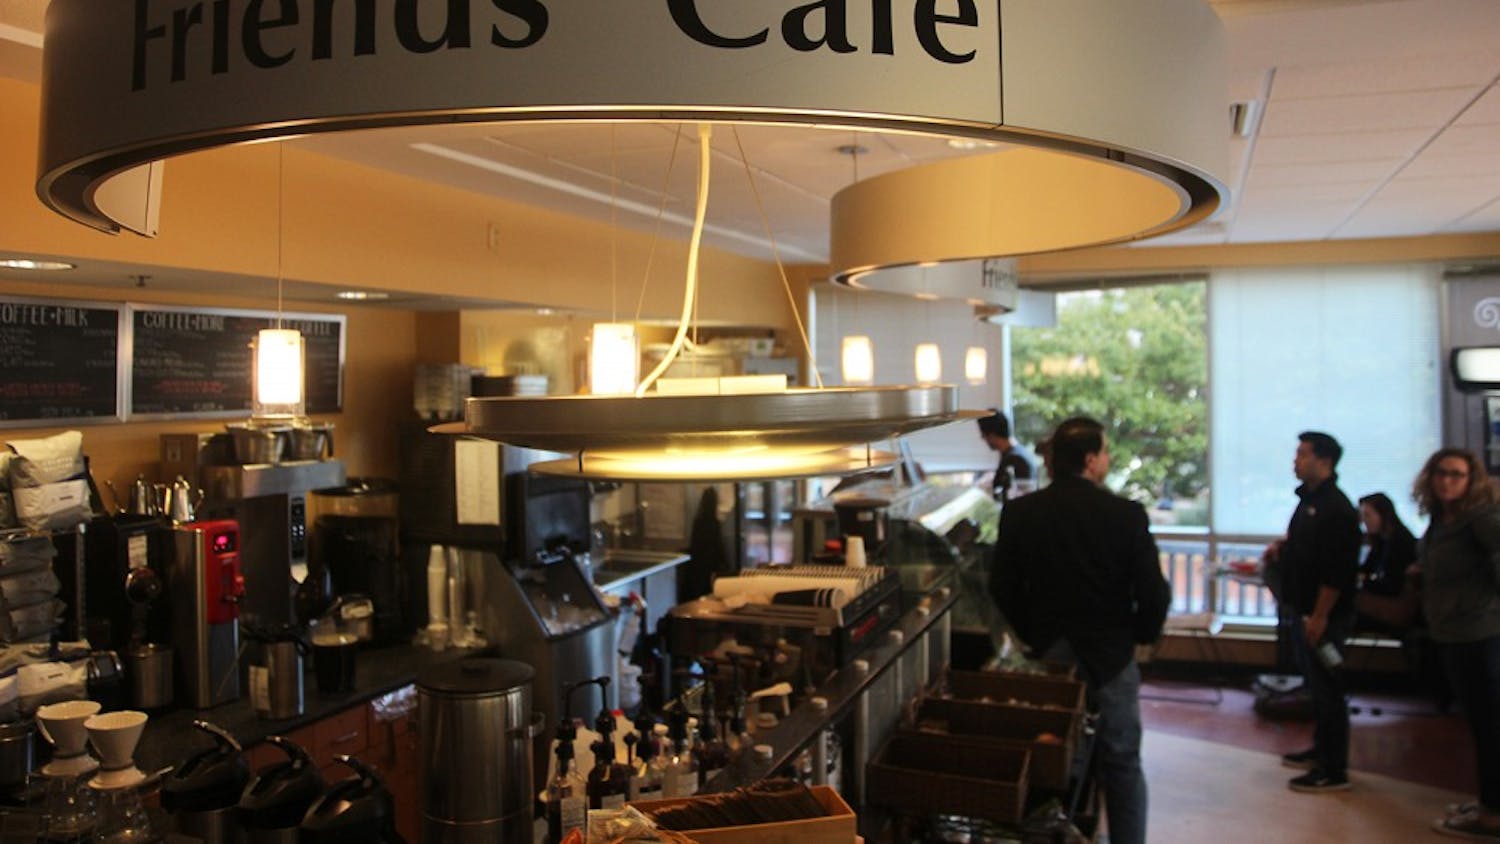 Friends' Cafe is located on the first floor of the Health Sciences Library.